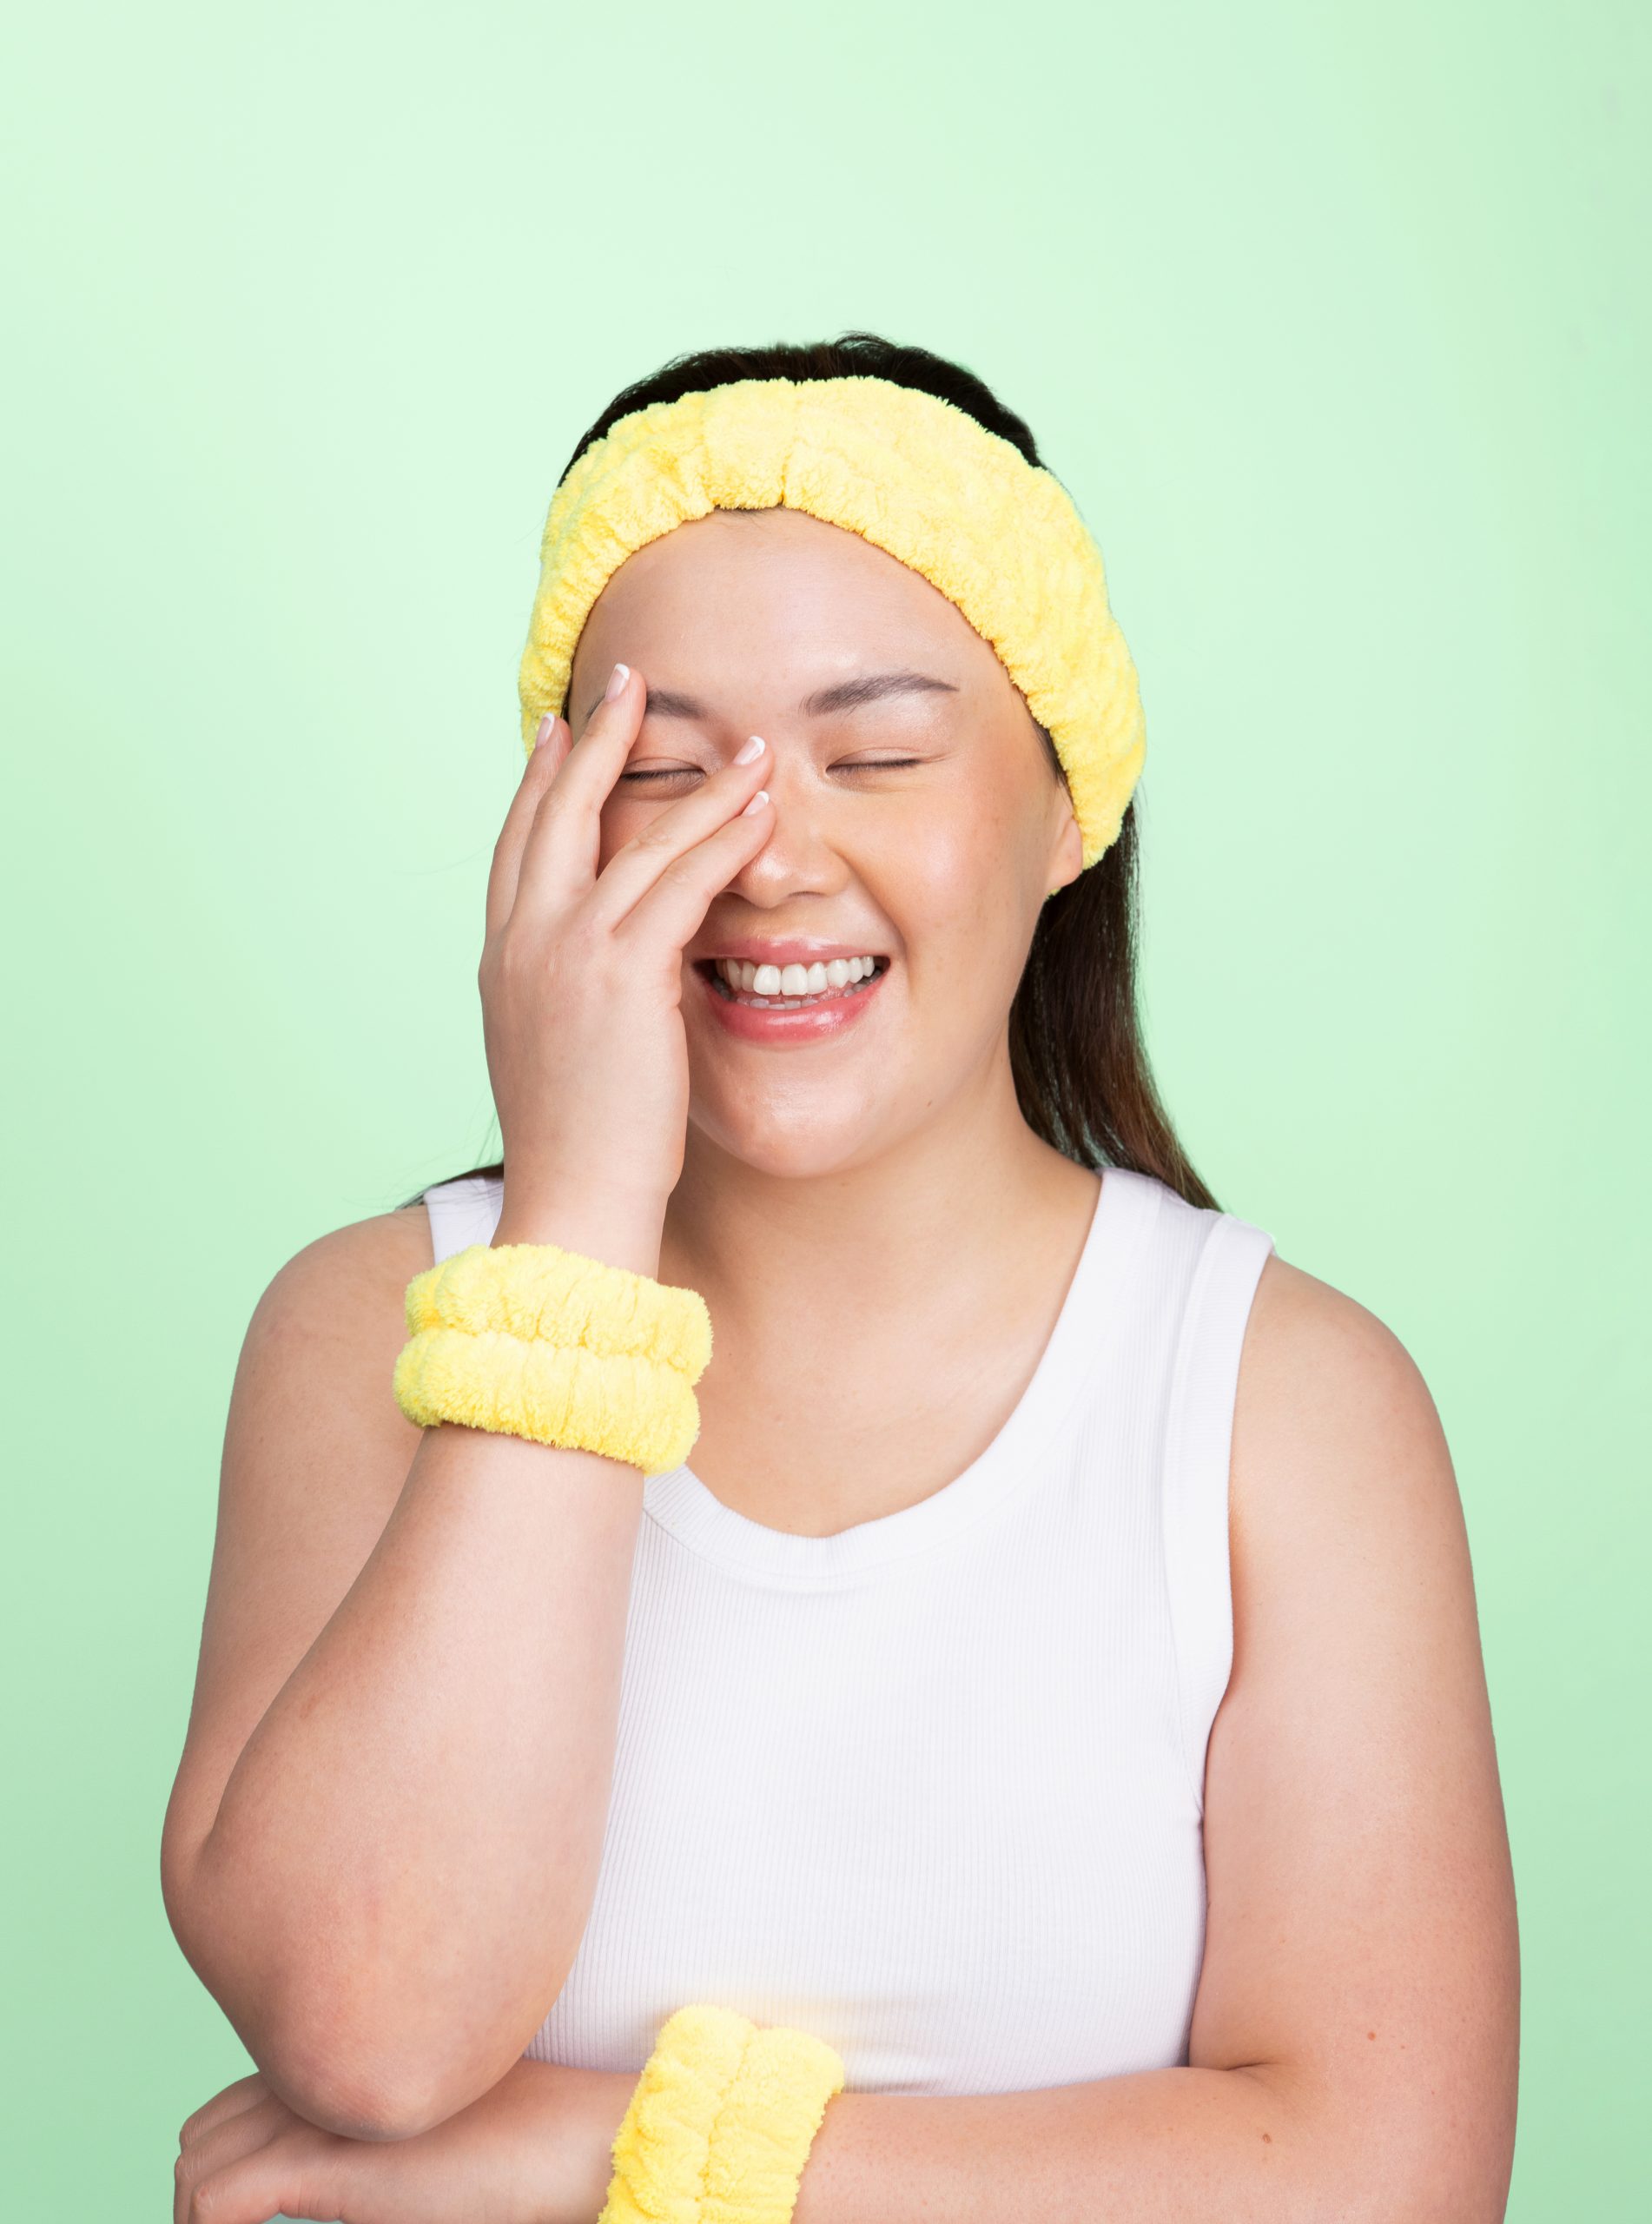 Girl laughing wearing yellow skincare headband in turban style and matching yellow spa wristbands